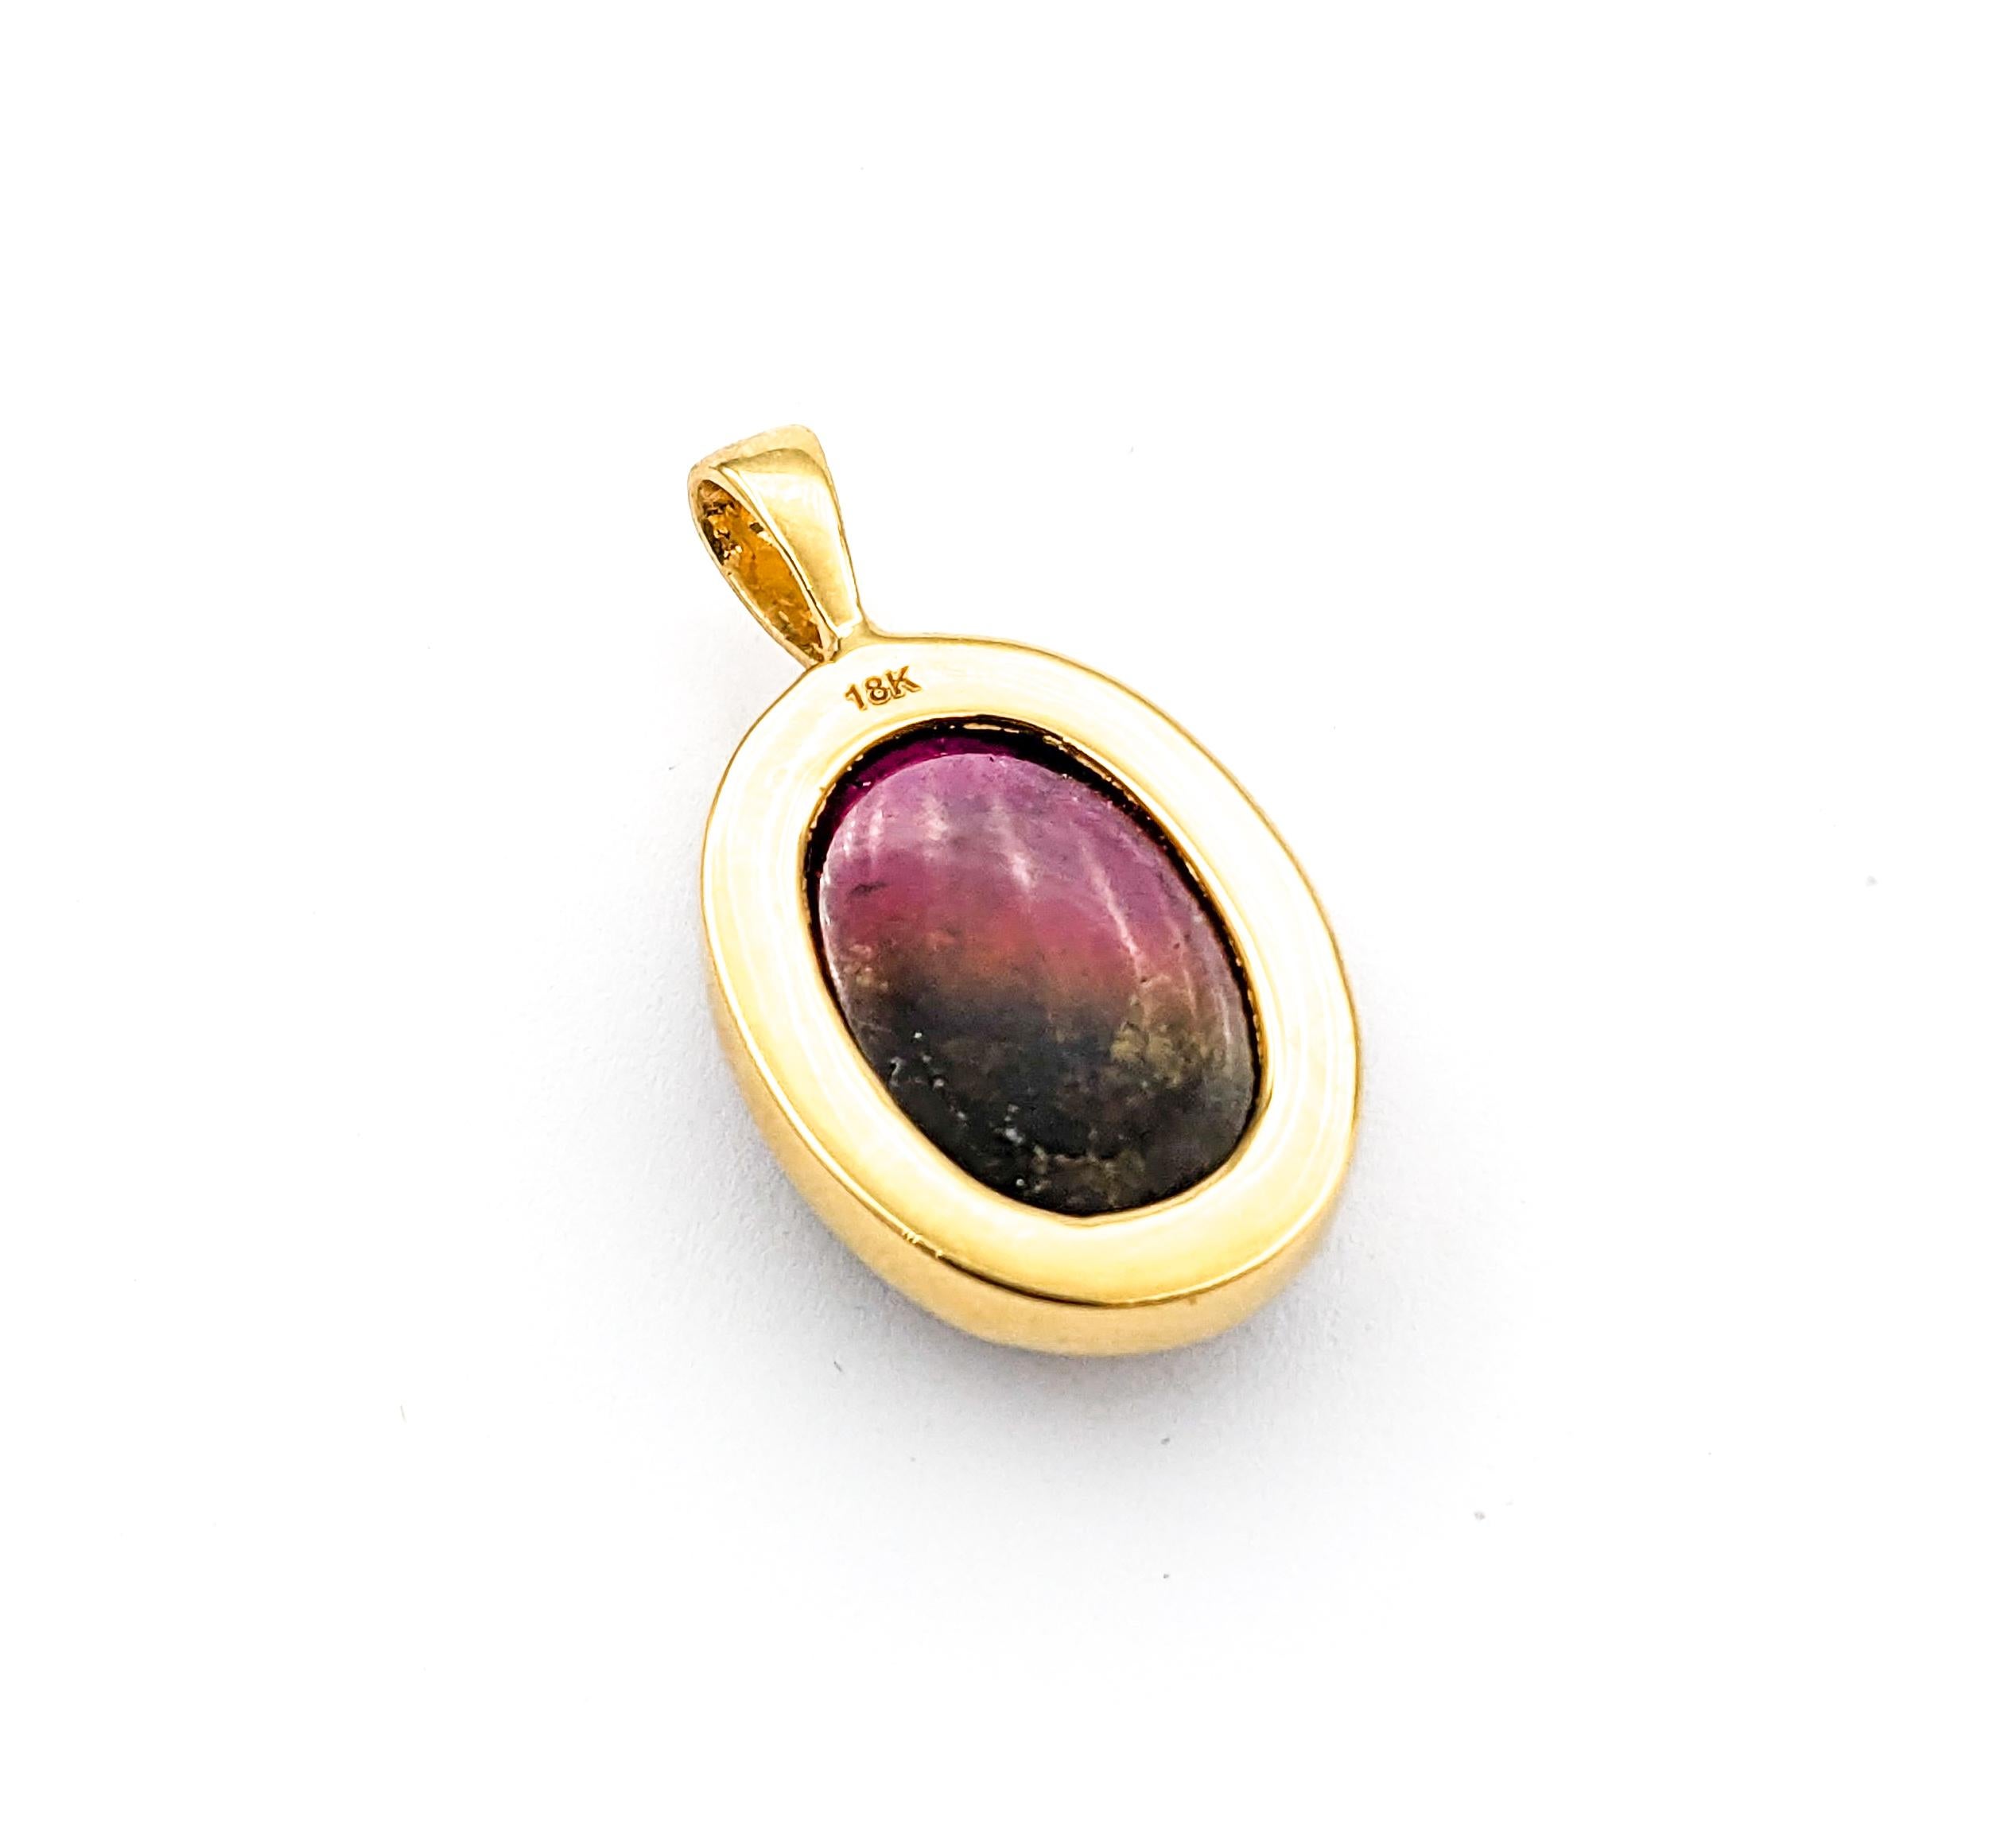 Fabulous 18k Oval Cabochon Watermelon Tourmaline Charm Pendant In Excellent Condition For Sale In Bloomington, MN